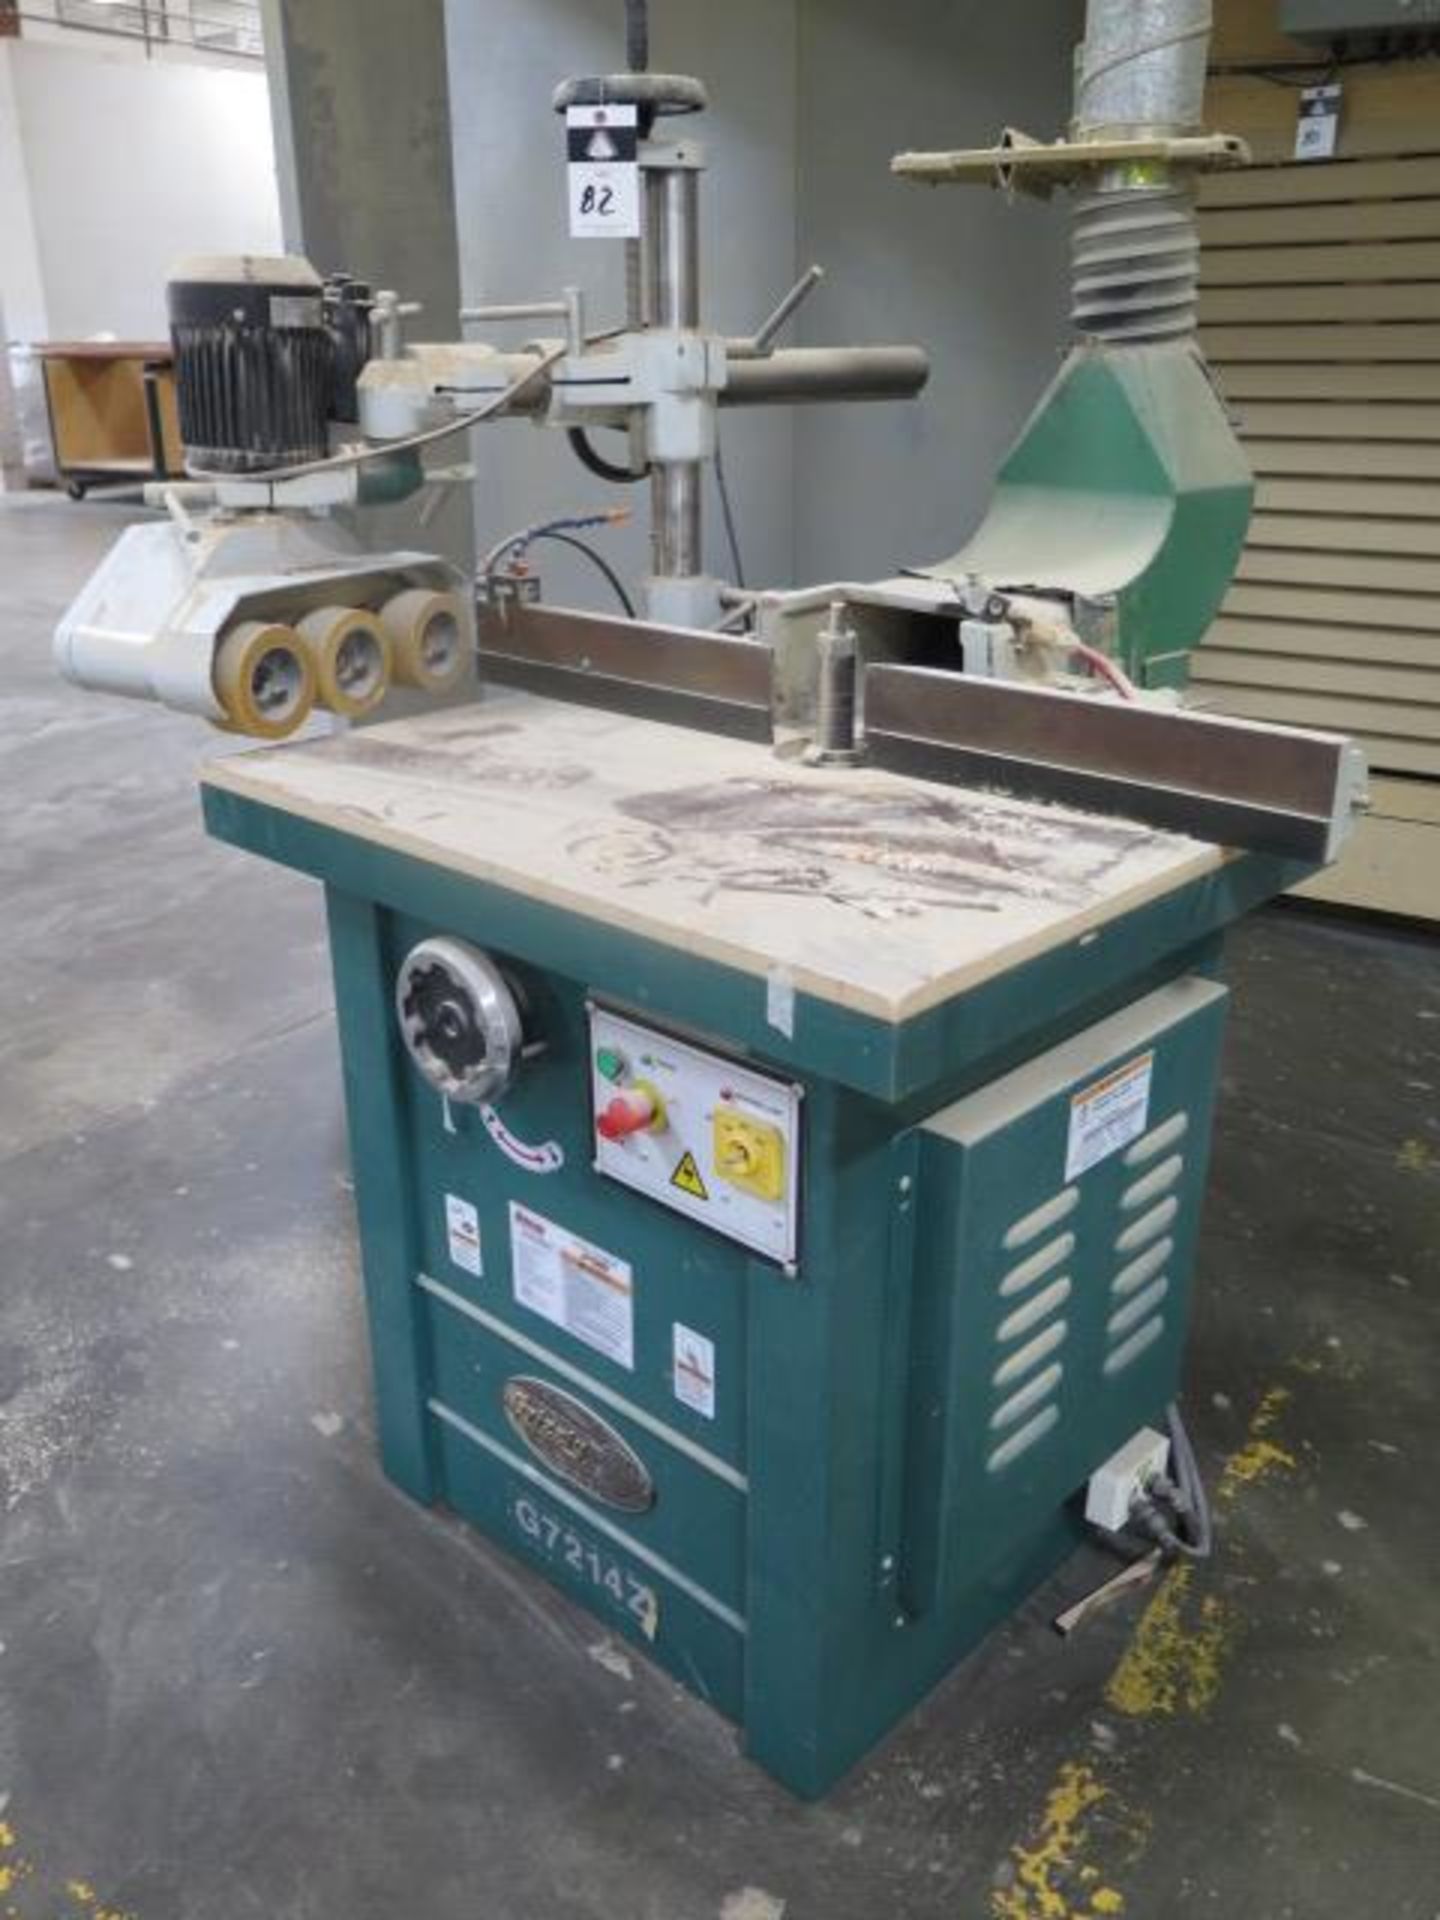 2014 Grizzly G7214Z Spindle Shaper s/n 038689 w/ 7.5Hp Motor, 3600-10,000 RPM, Seco SK-303FD 3- - Image 2 of 9